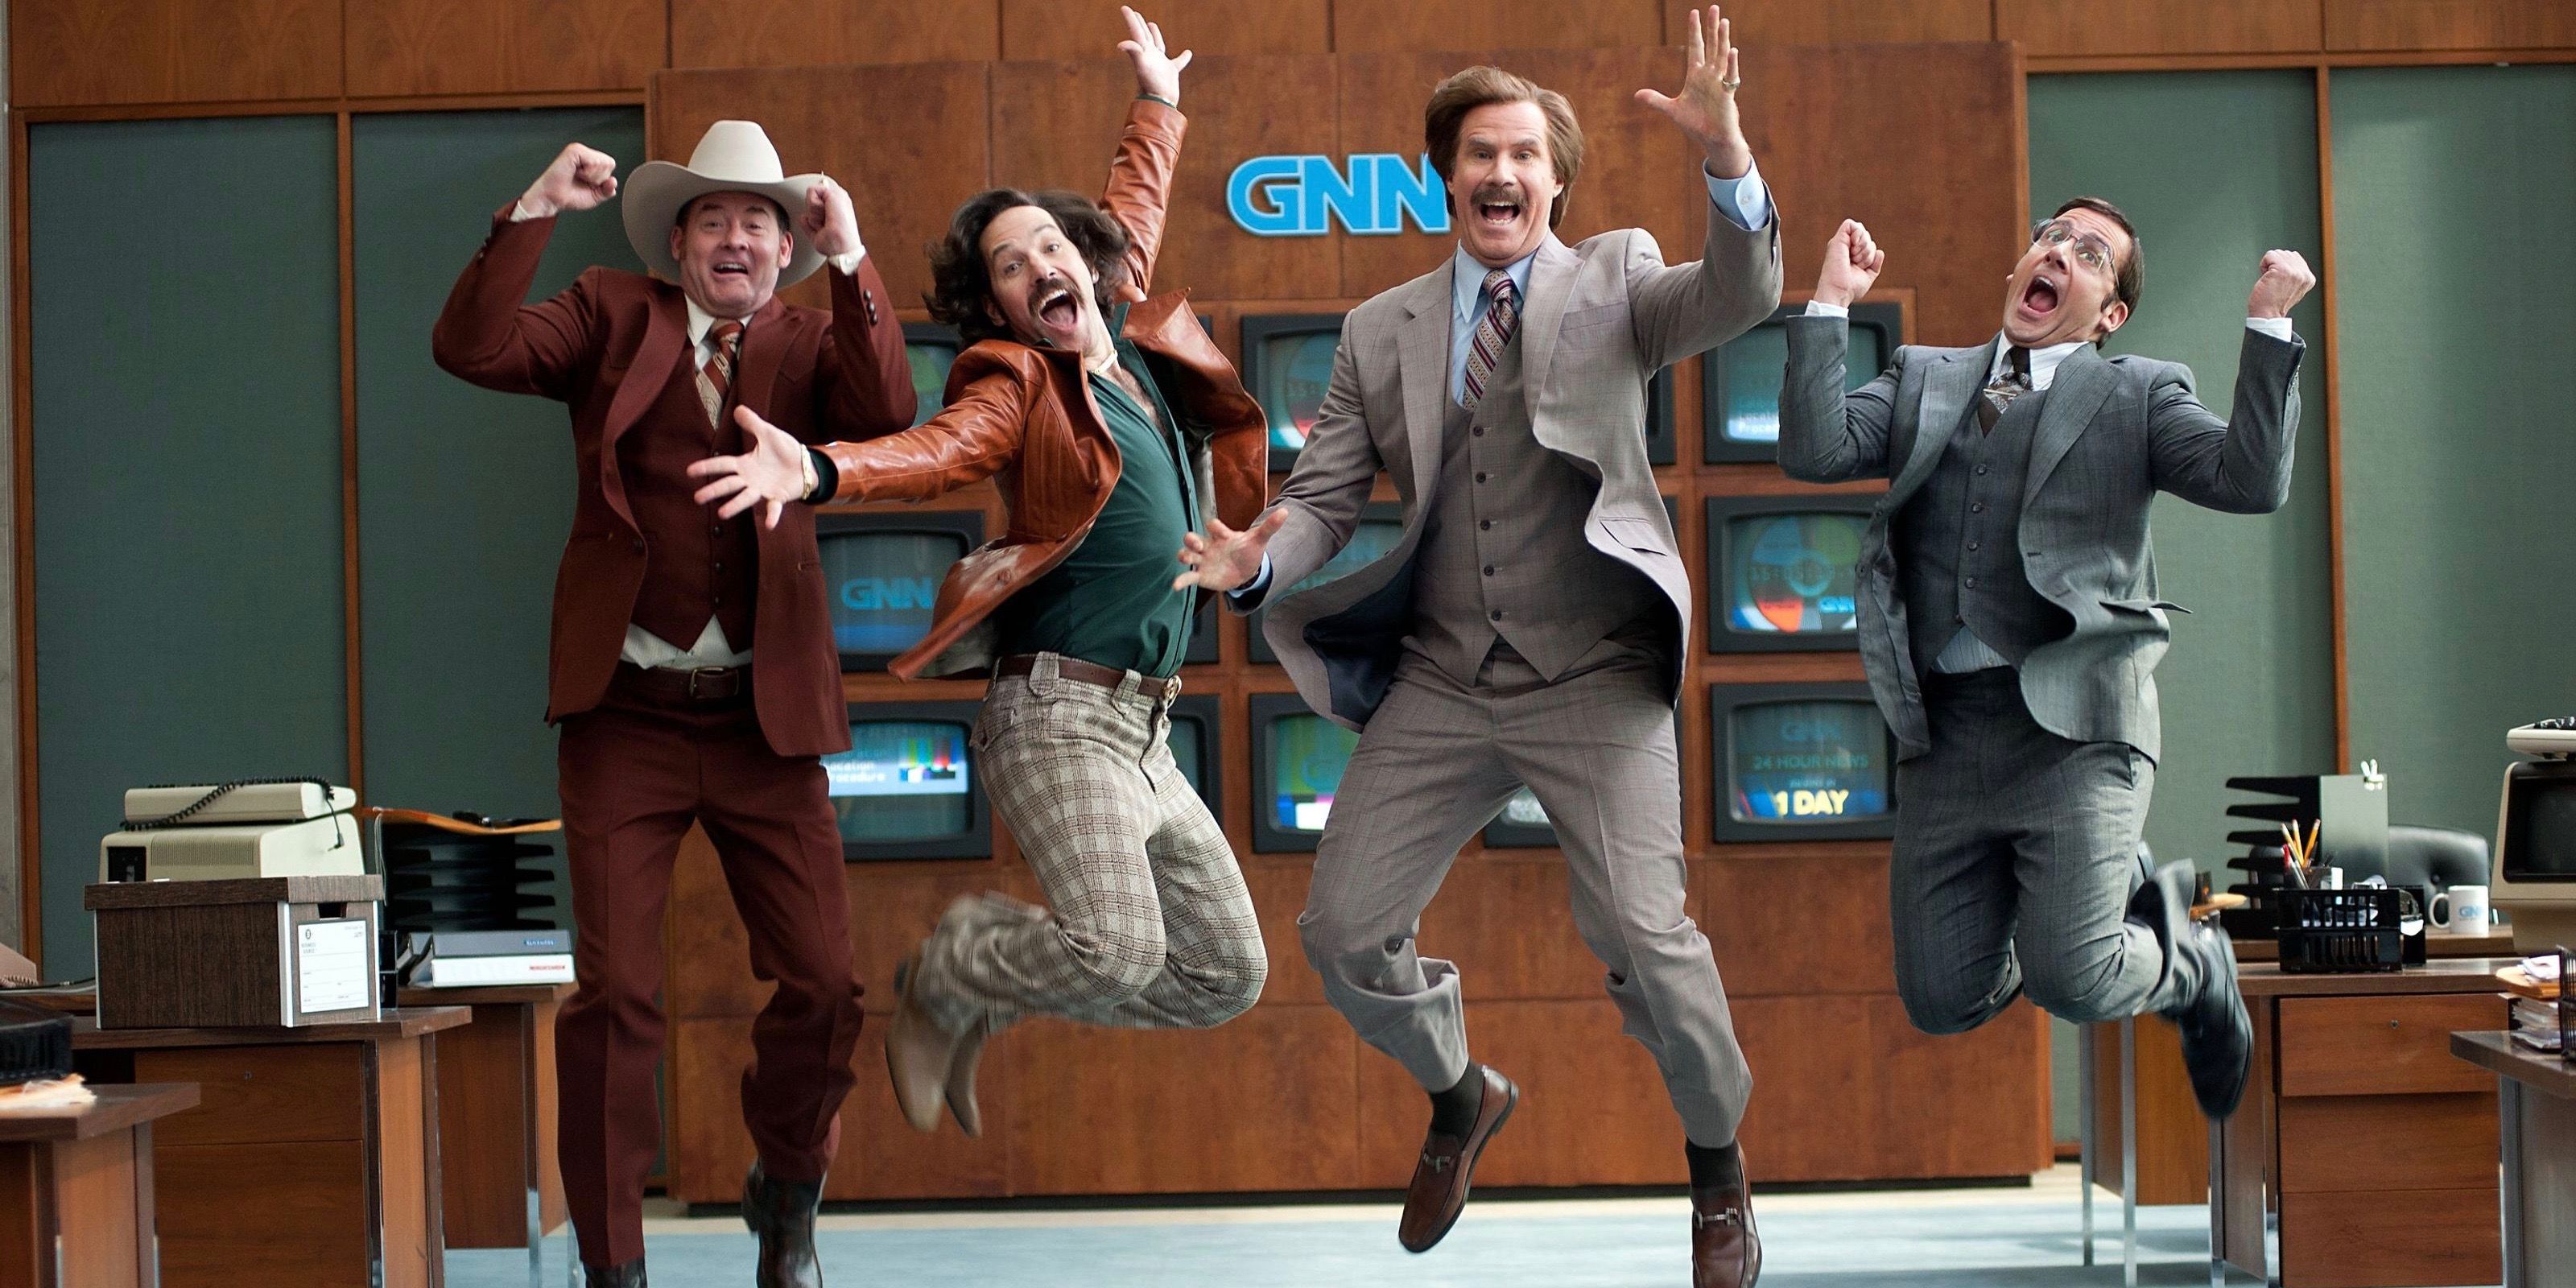 Will Ferrell, Paul Rudd, Steve Carell, and David Koechner in Anchorman 2 The Legend Continues